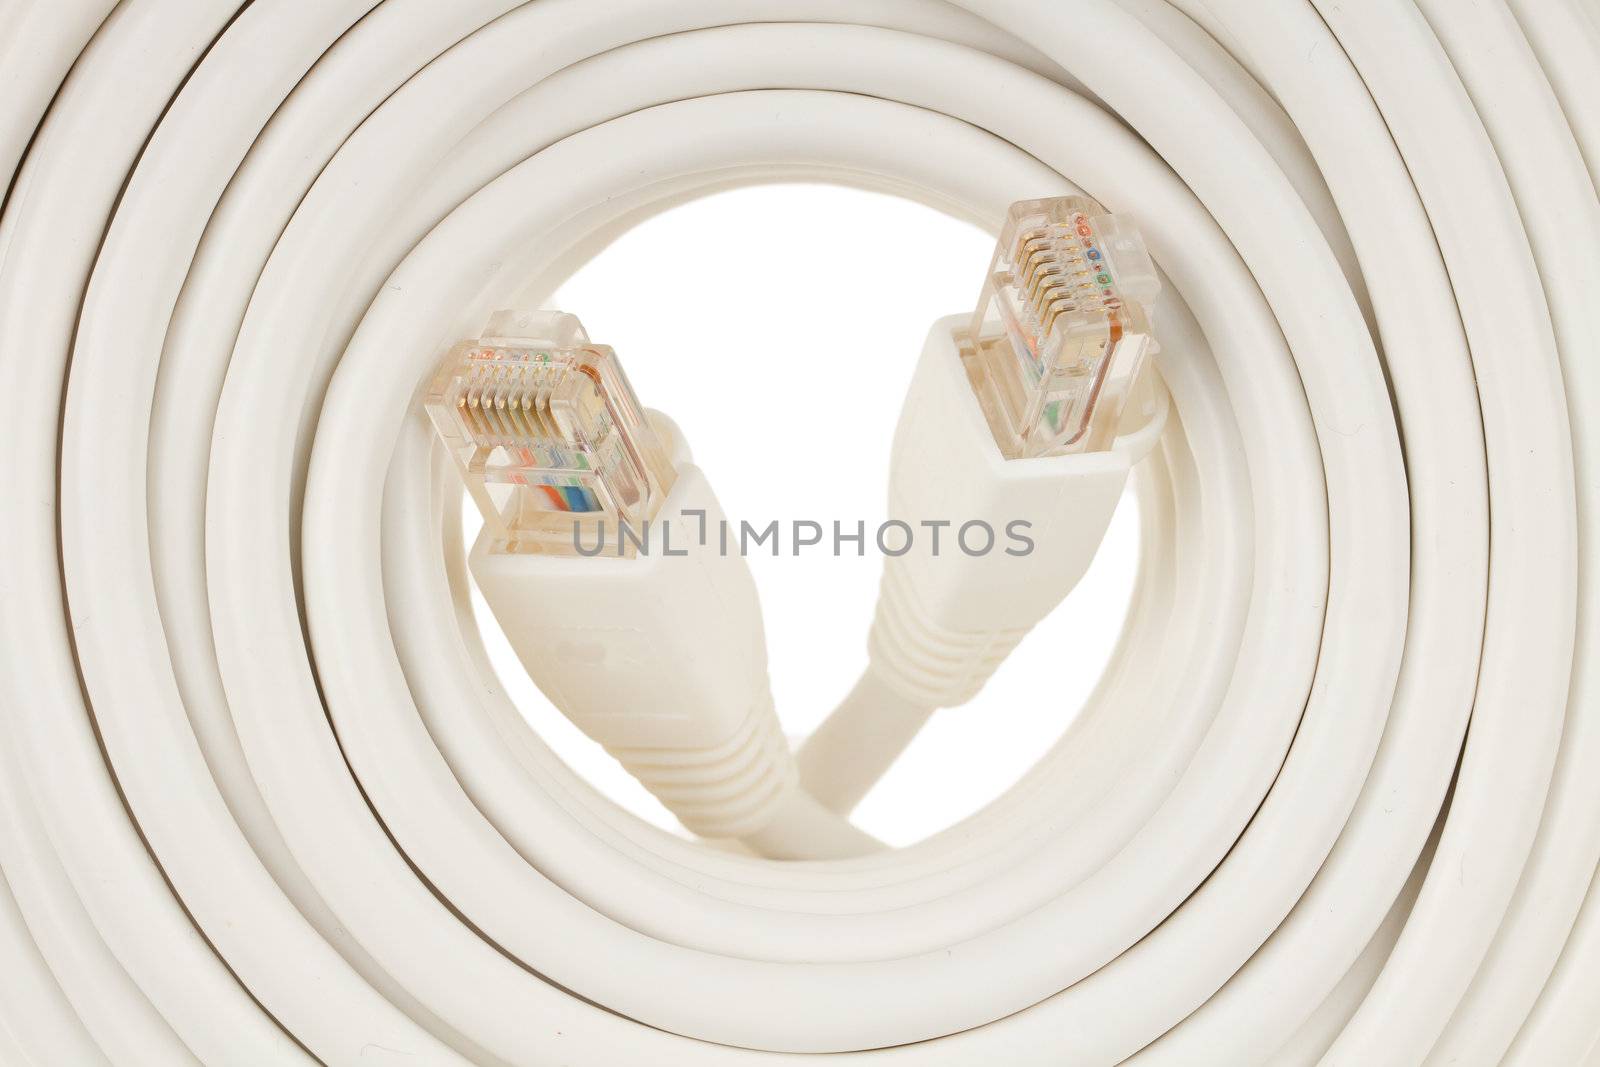 Close-up of a white RJ45 network plug on white background